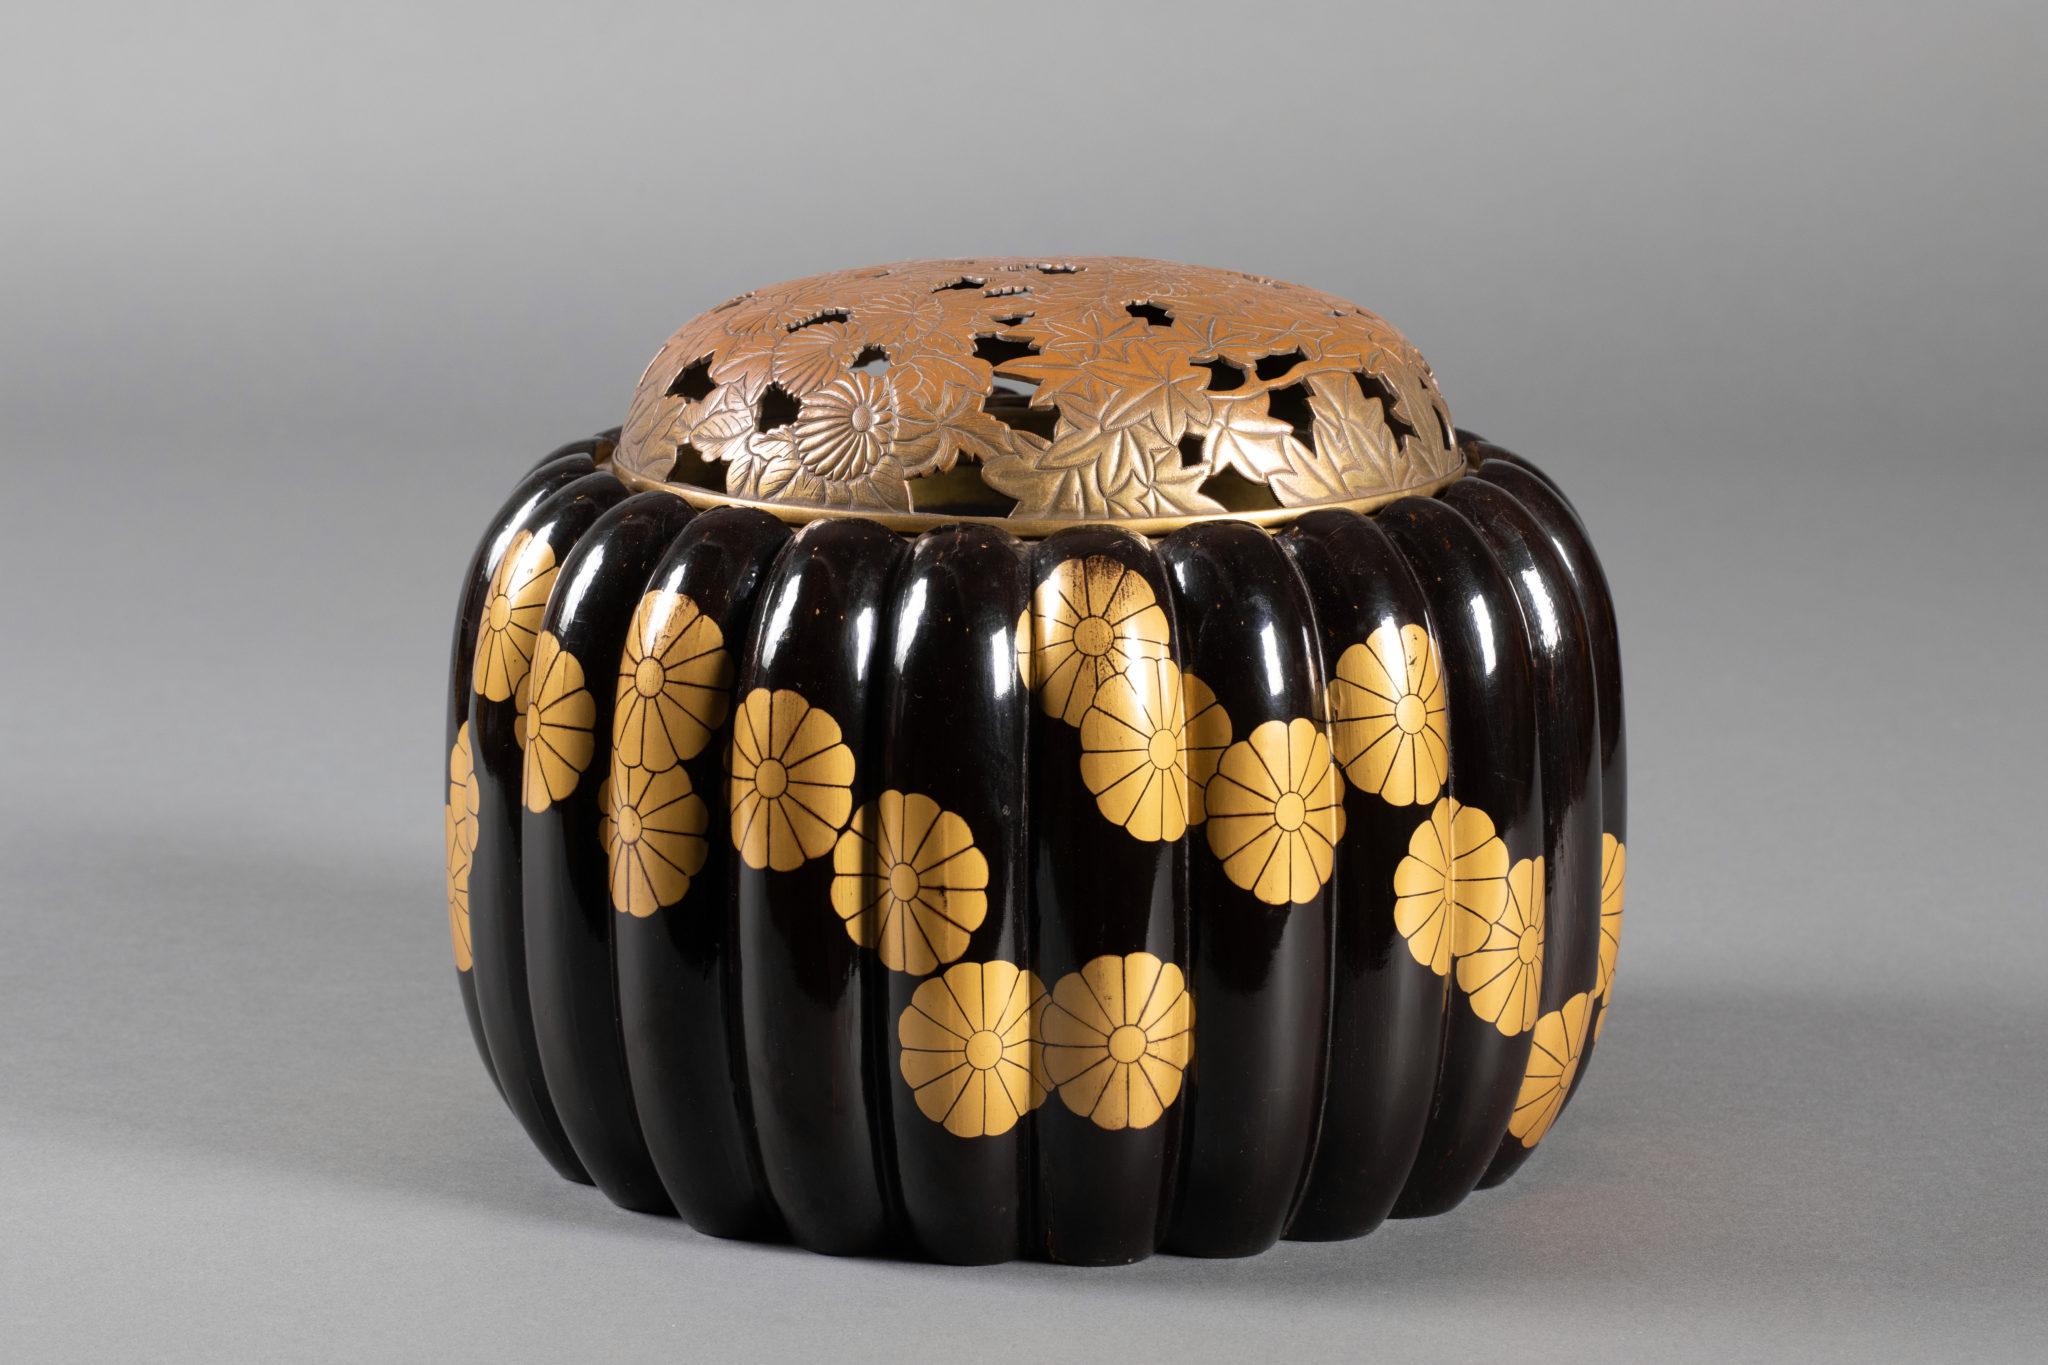 With chrysanthemum motif and a gilded bronze lid. Includes unsigned collector's box. Interior measurements: 7 1/2